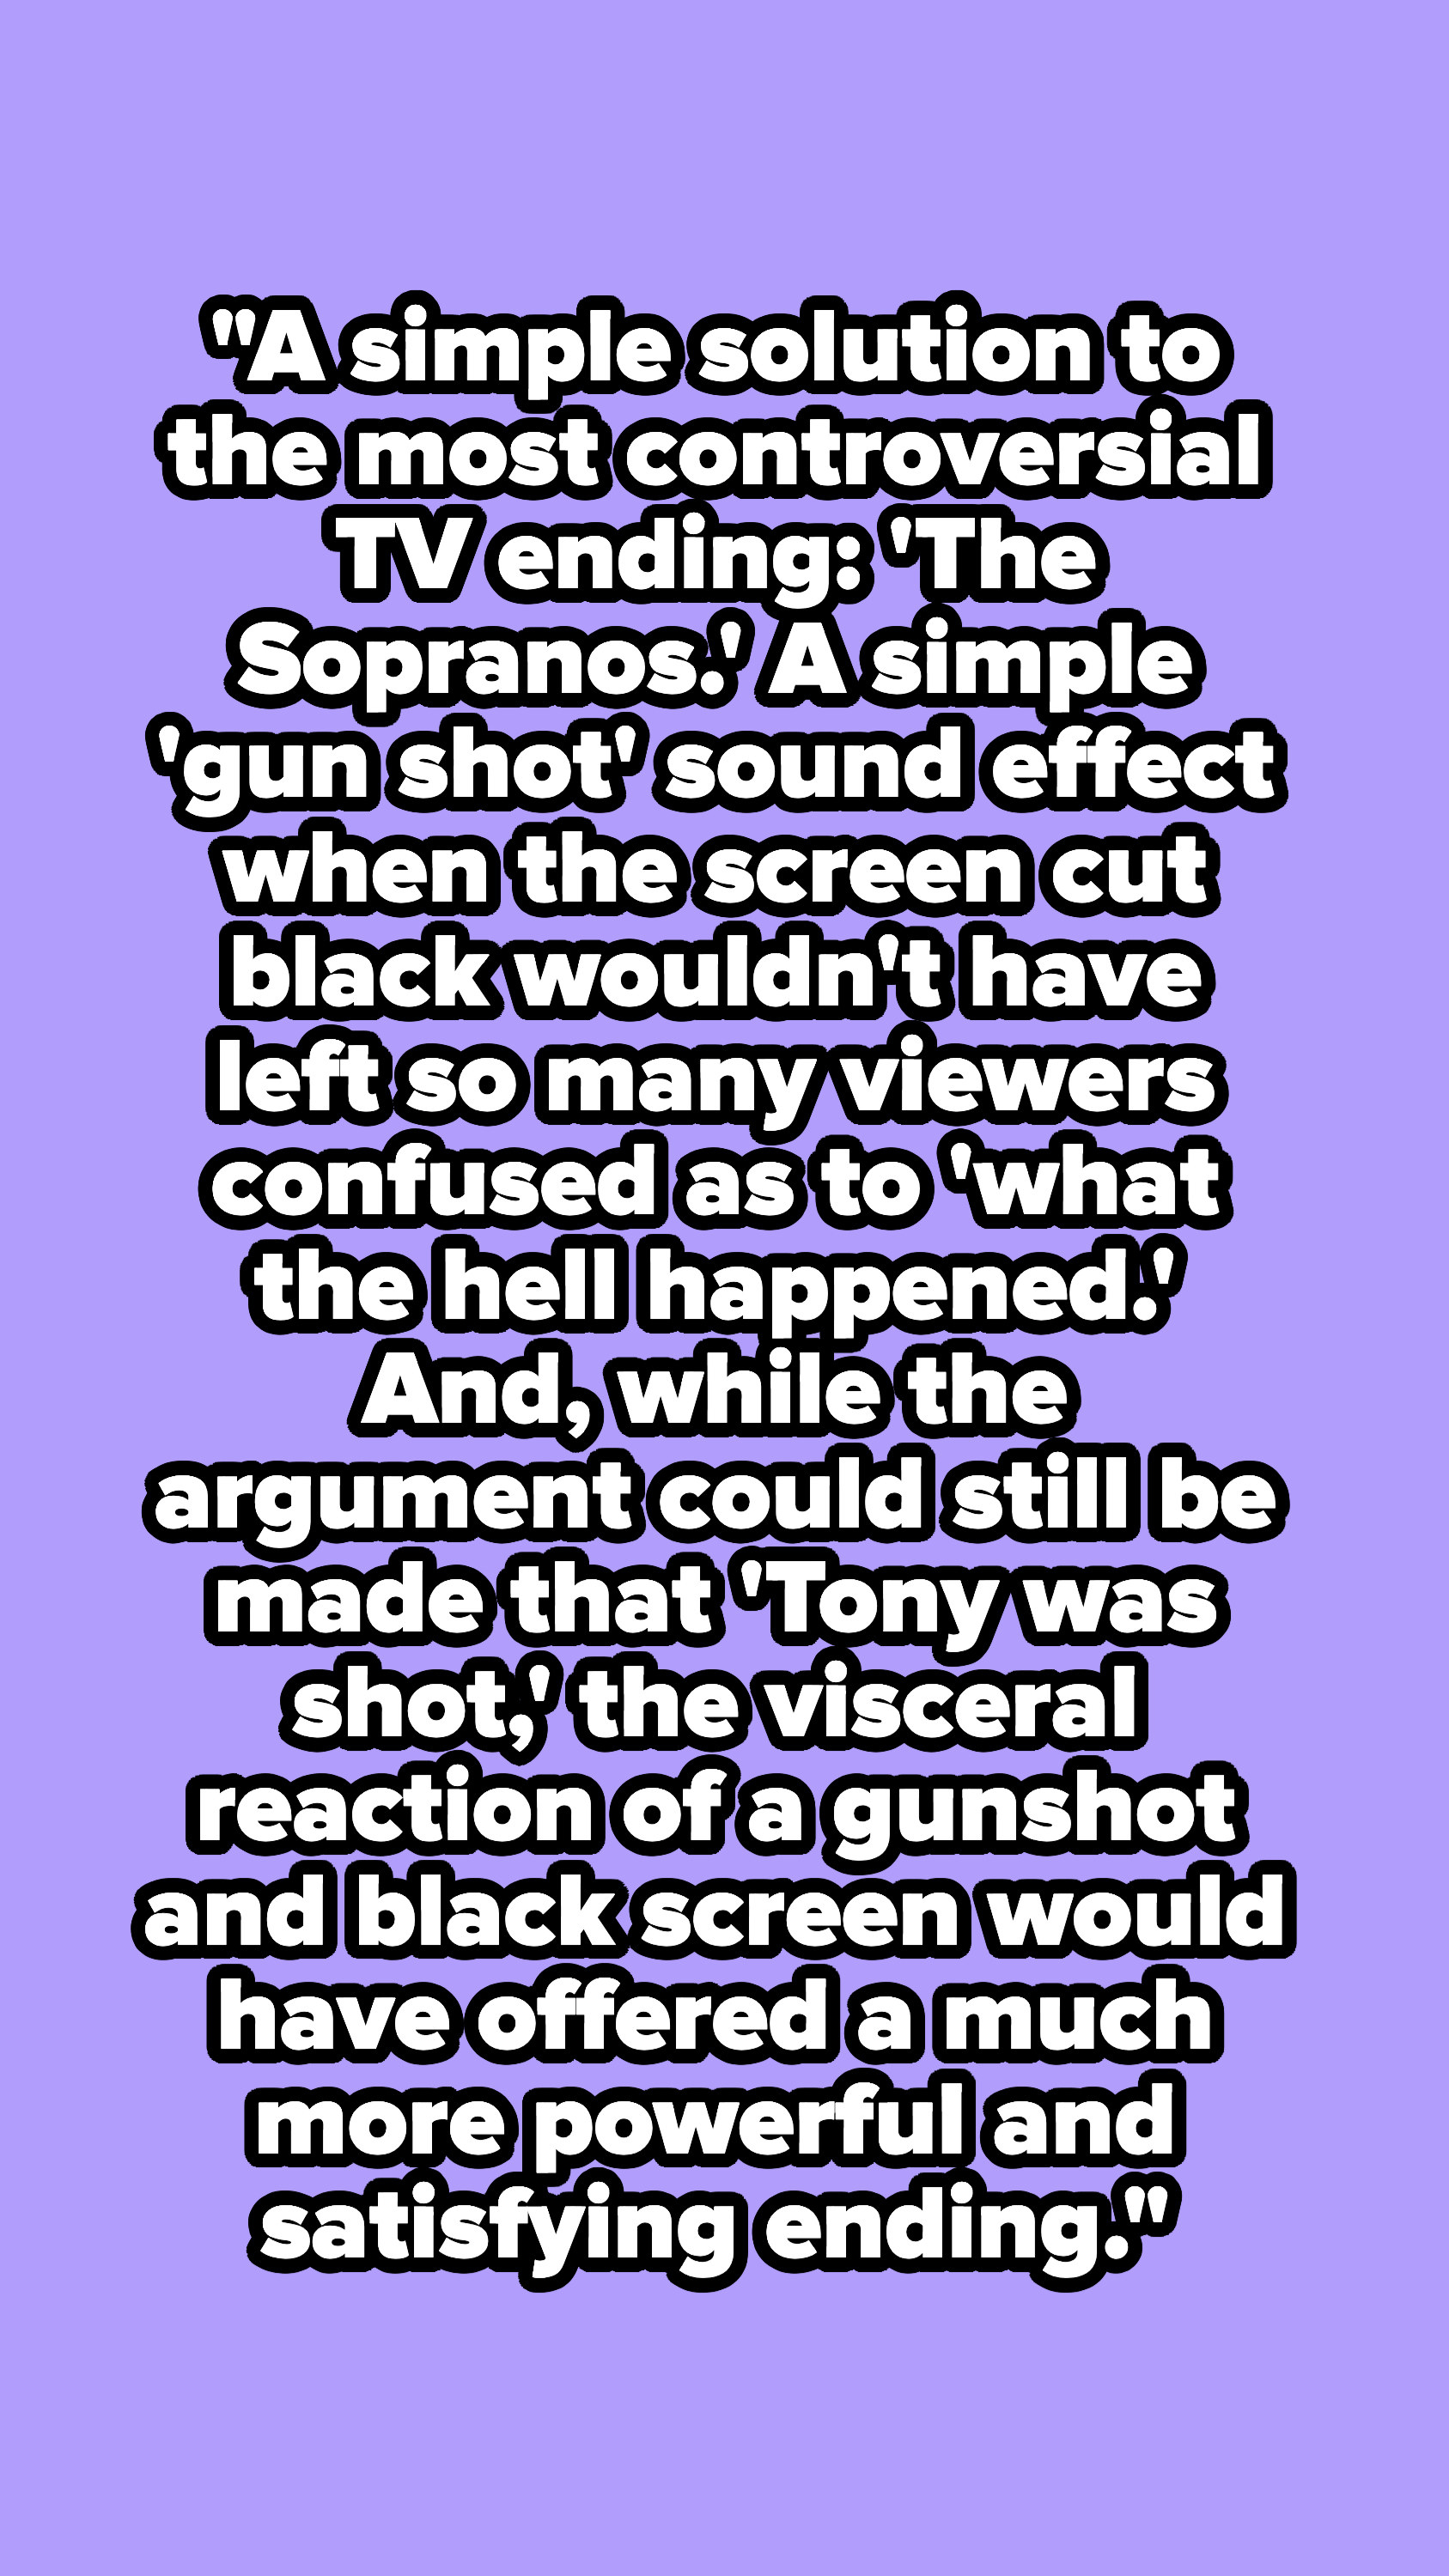 A simple &#x27;gun shot&#x27; sound effect when the screen cut to black wouldn&#x27;t have left so many viewers confused as to &#x27;what the hell happened.&#x27;&quot;